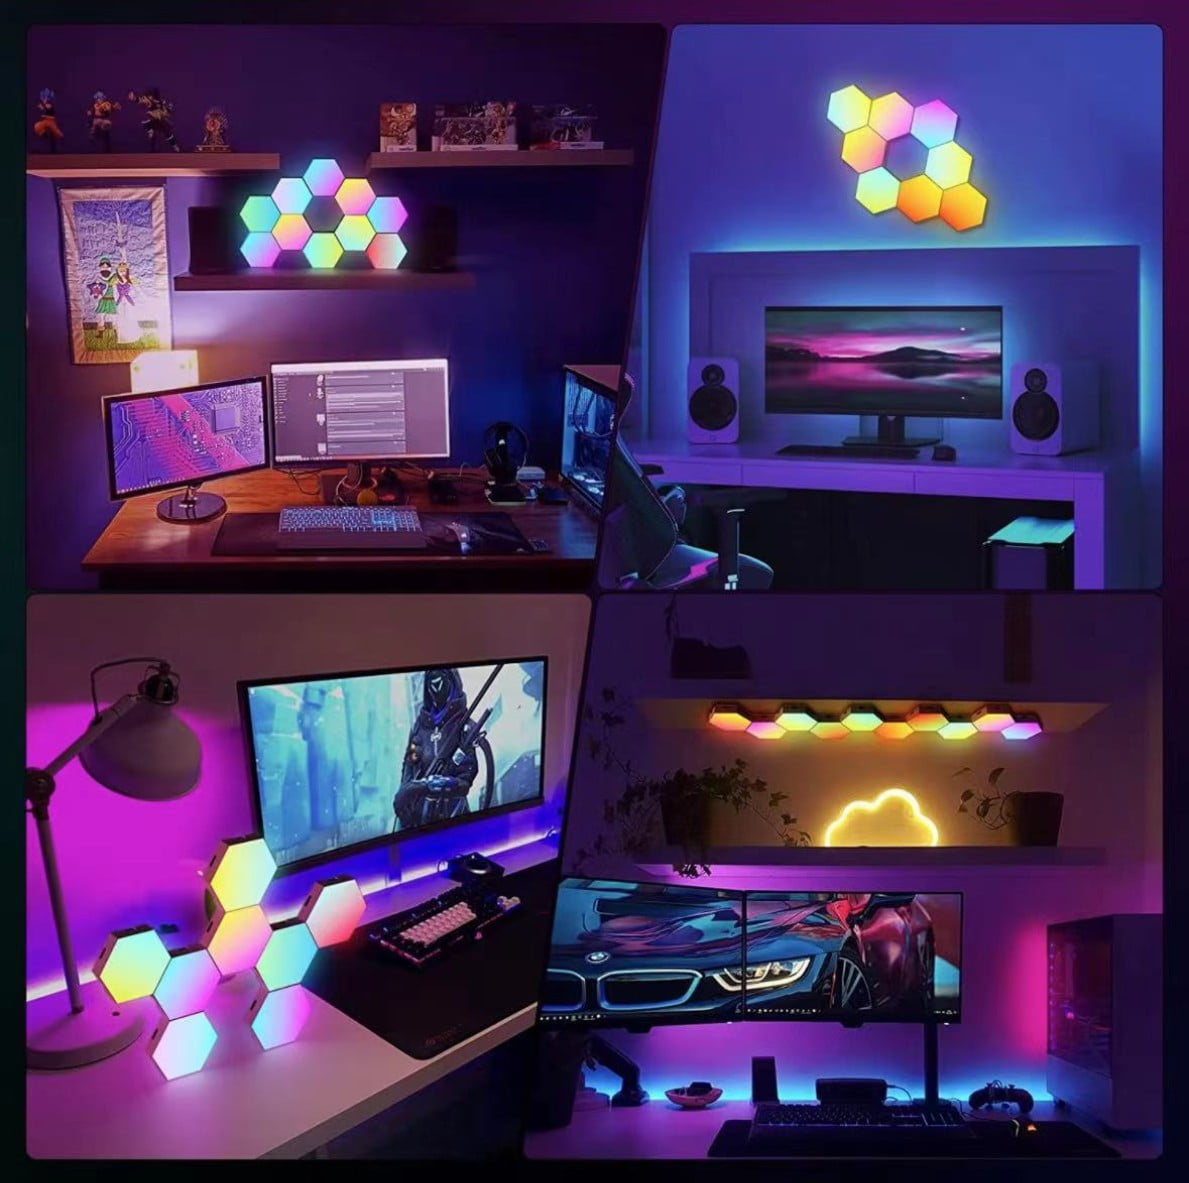 8 Pack Hexagon Light Panels - Smart Rgb Hexagon Led Lights Wall Lights With  App & Remote Control Cool Music Sync Gaming Lights Tile Light For Living R